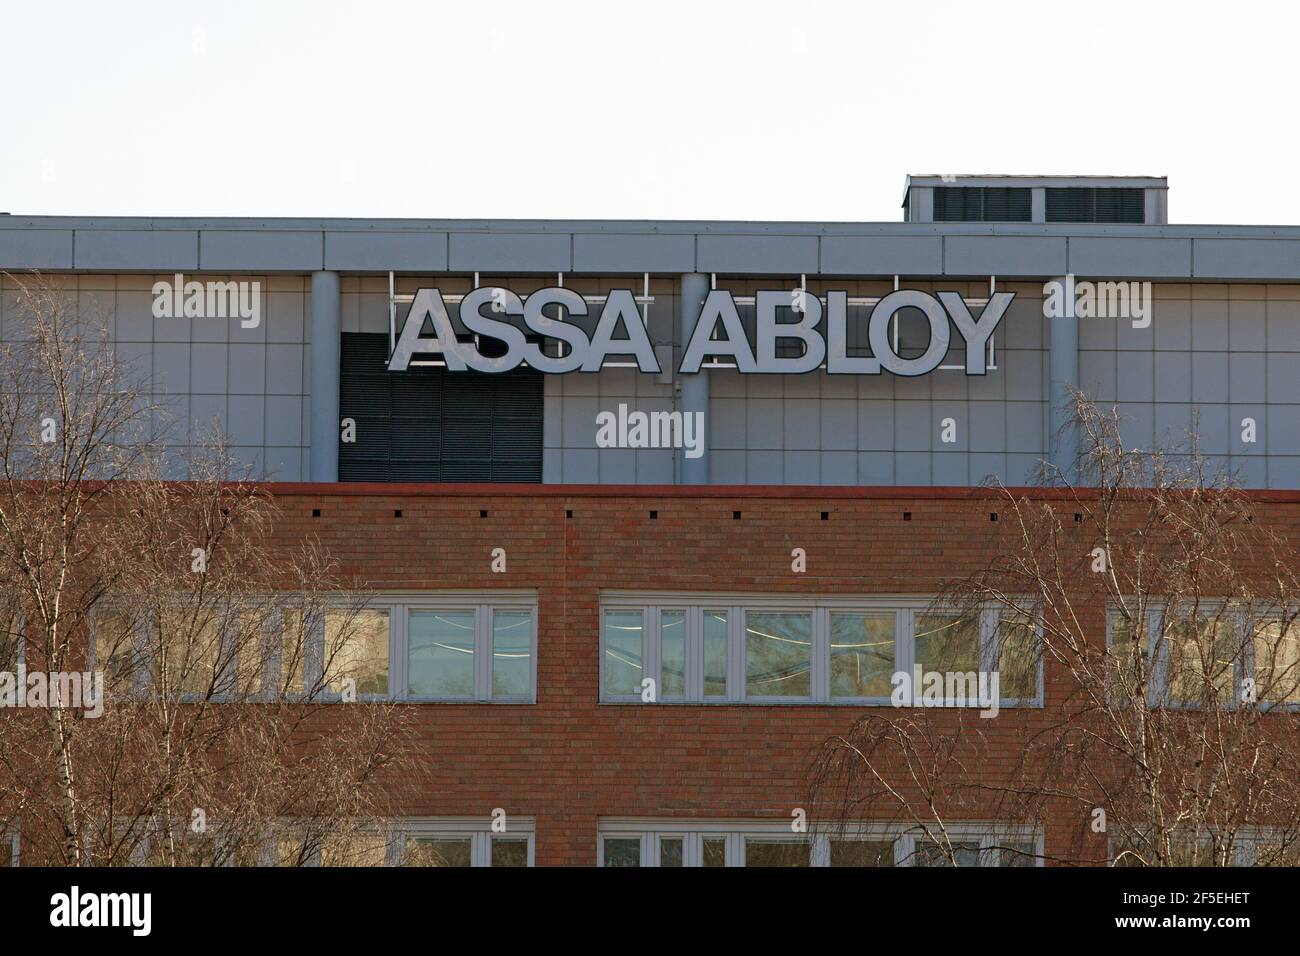 Stockholm, Sweden - March 25, 2021: Fasade sign of Swedish Finnish lock company Assa-Abloy to be used for news about the company, their financial deve Stock Photo